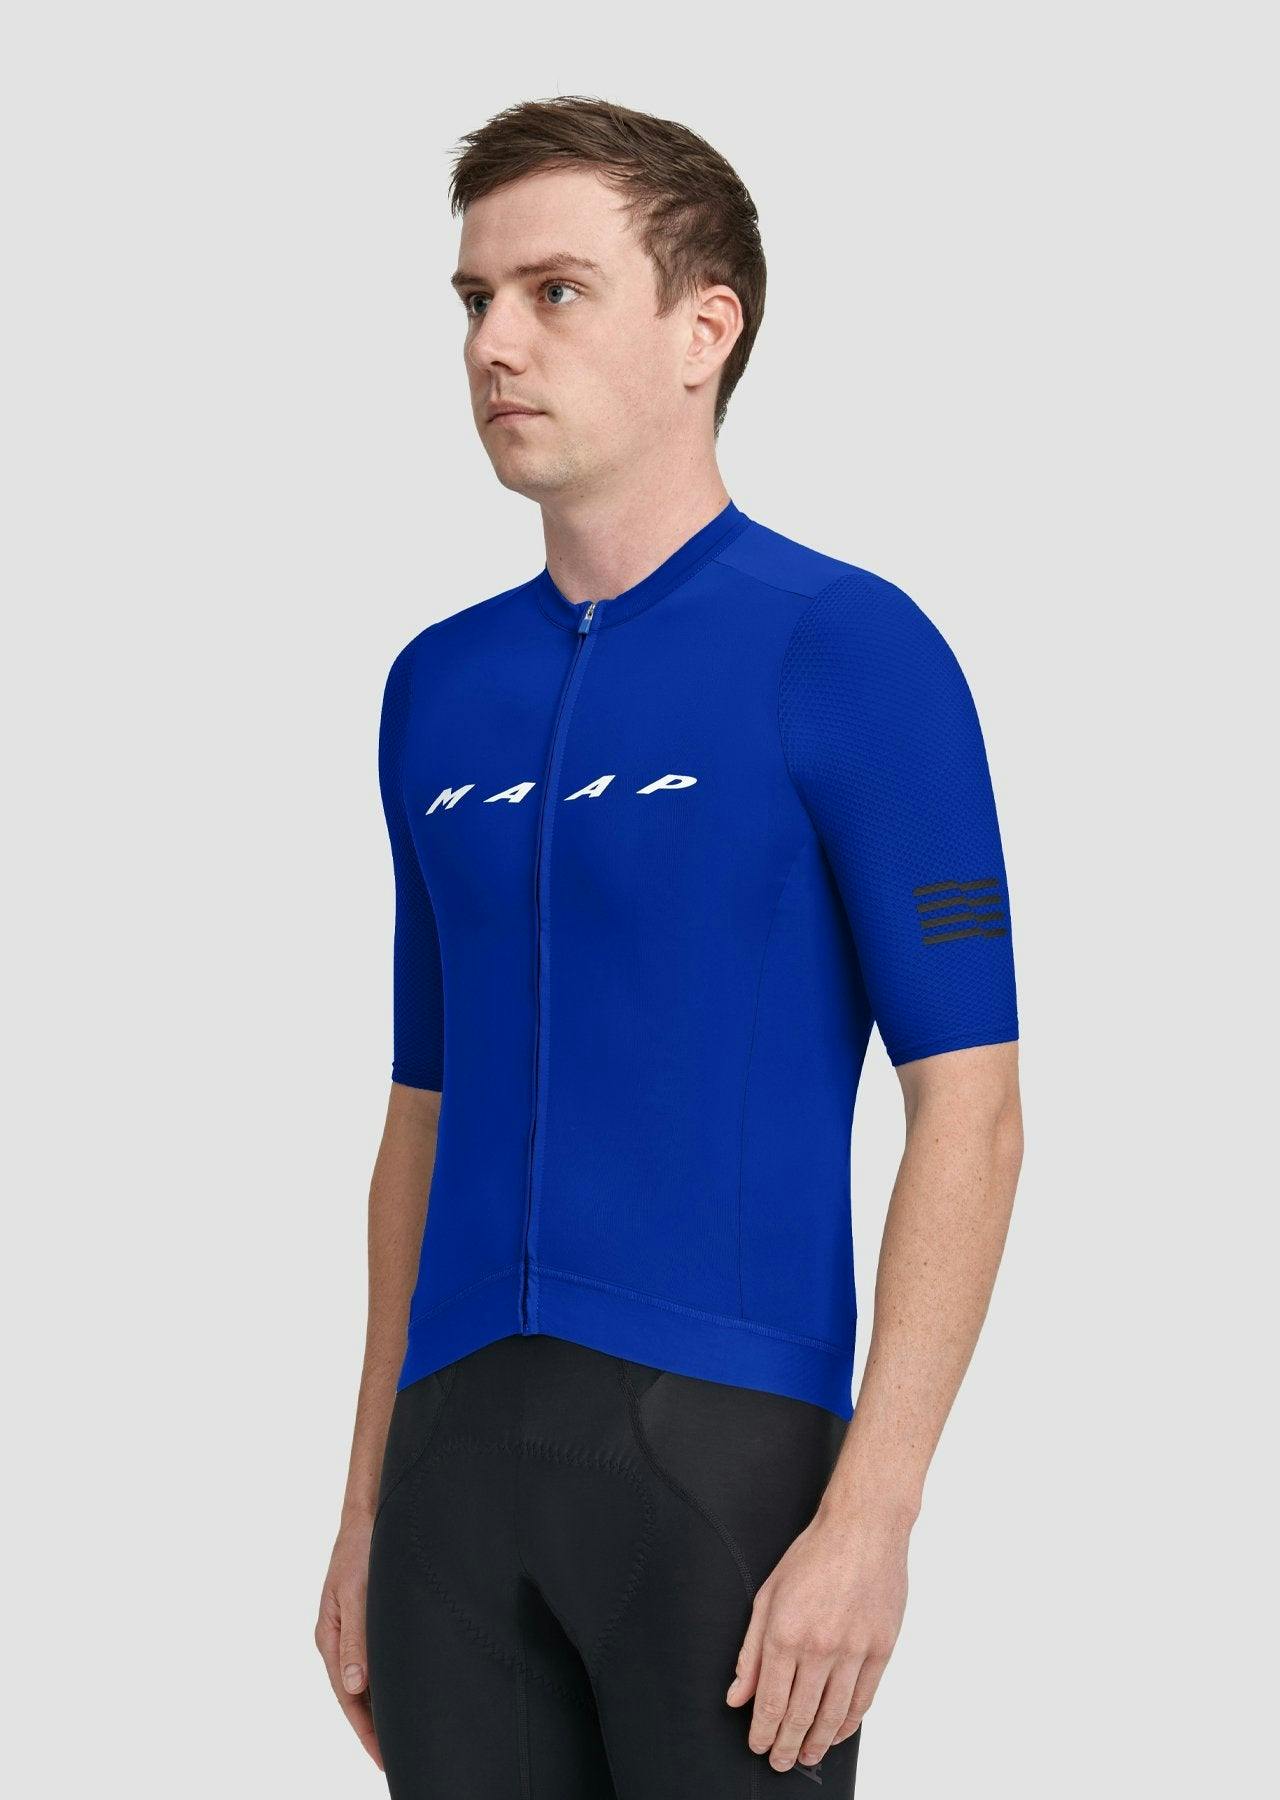 Cycling Clothing Sale | Cycling Jersey Sale | MAAP